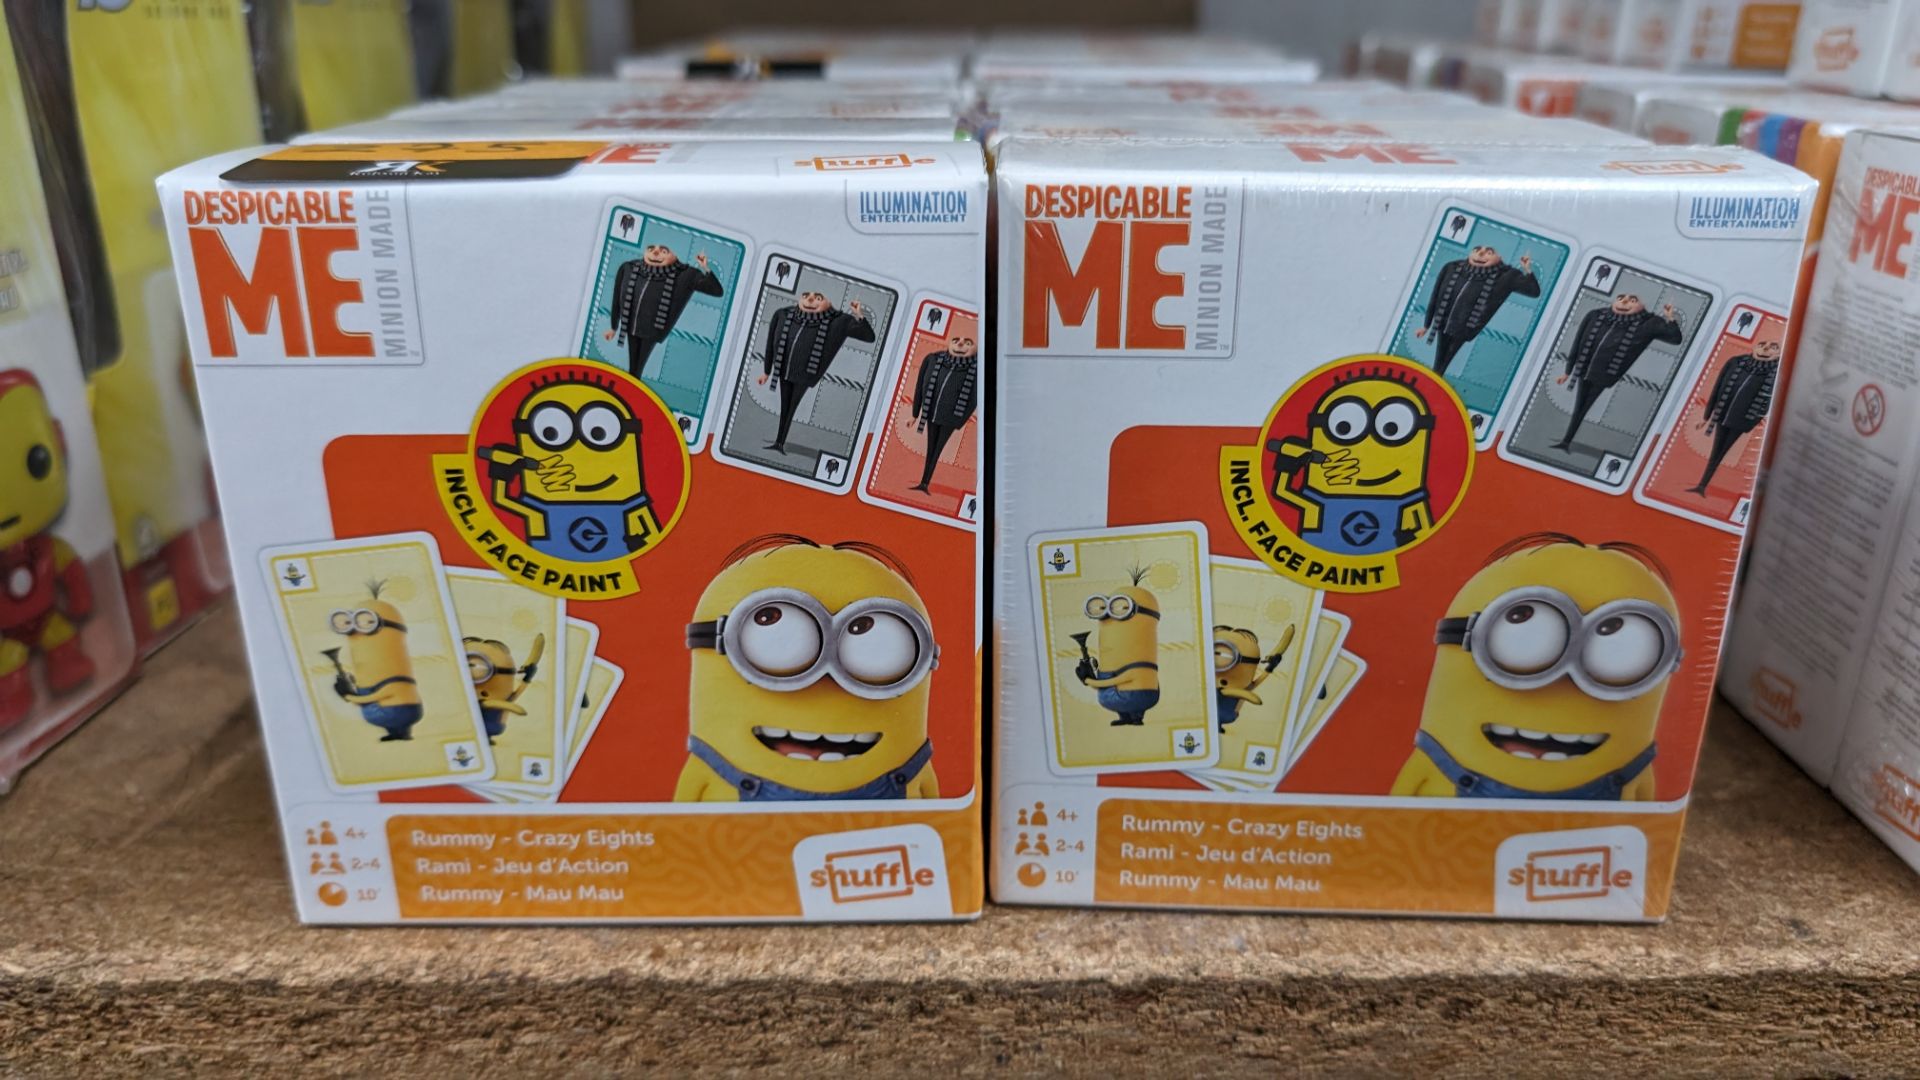 10 off Despicable Me Rummy/Crazy Eights card game gifts, each including face paint marker and rule b